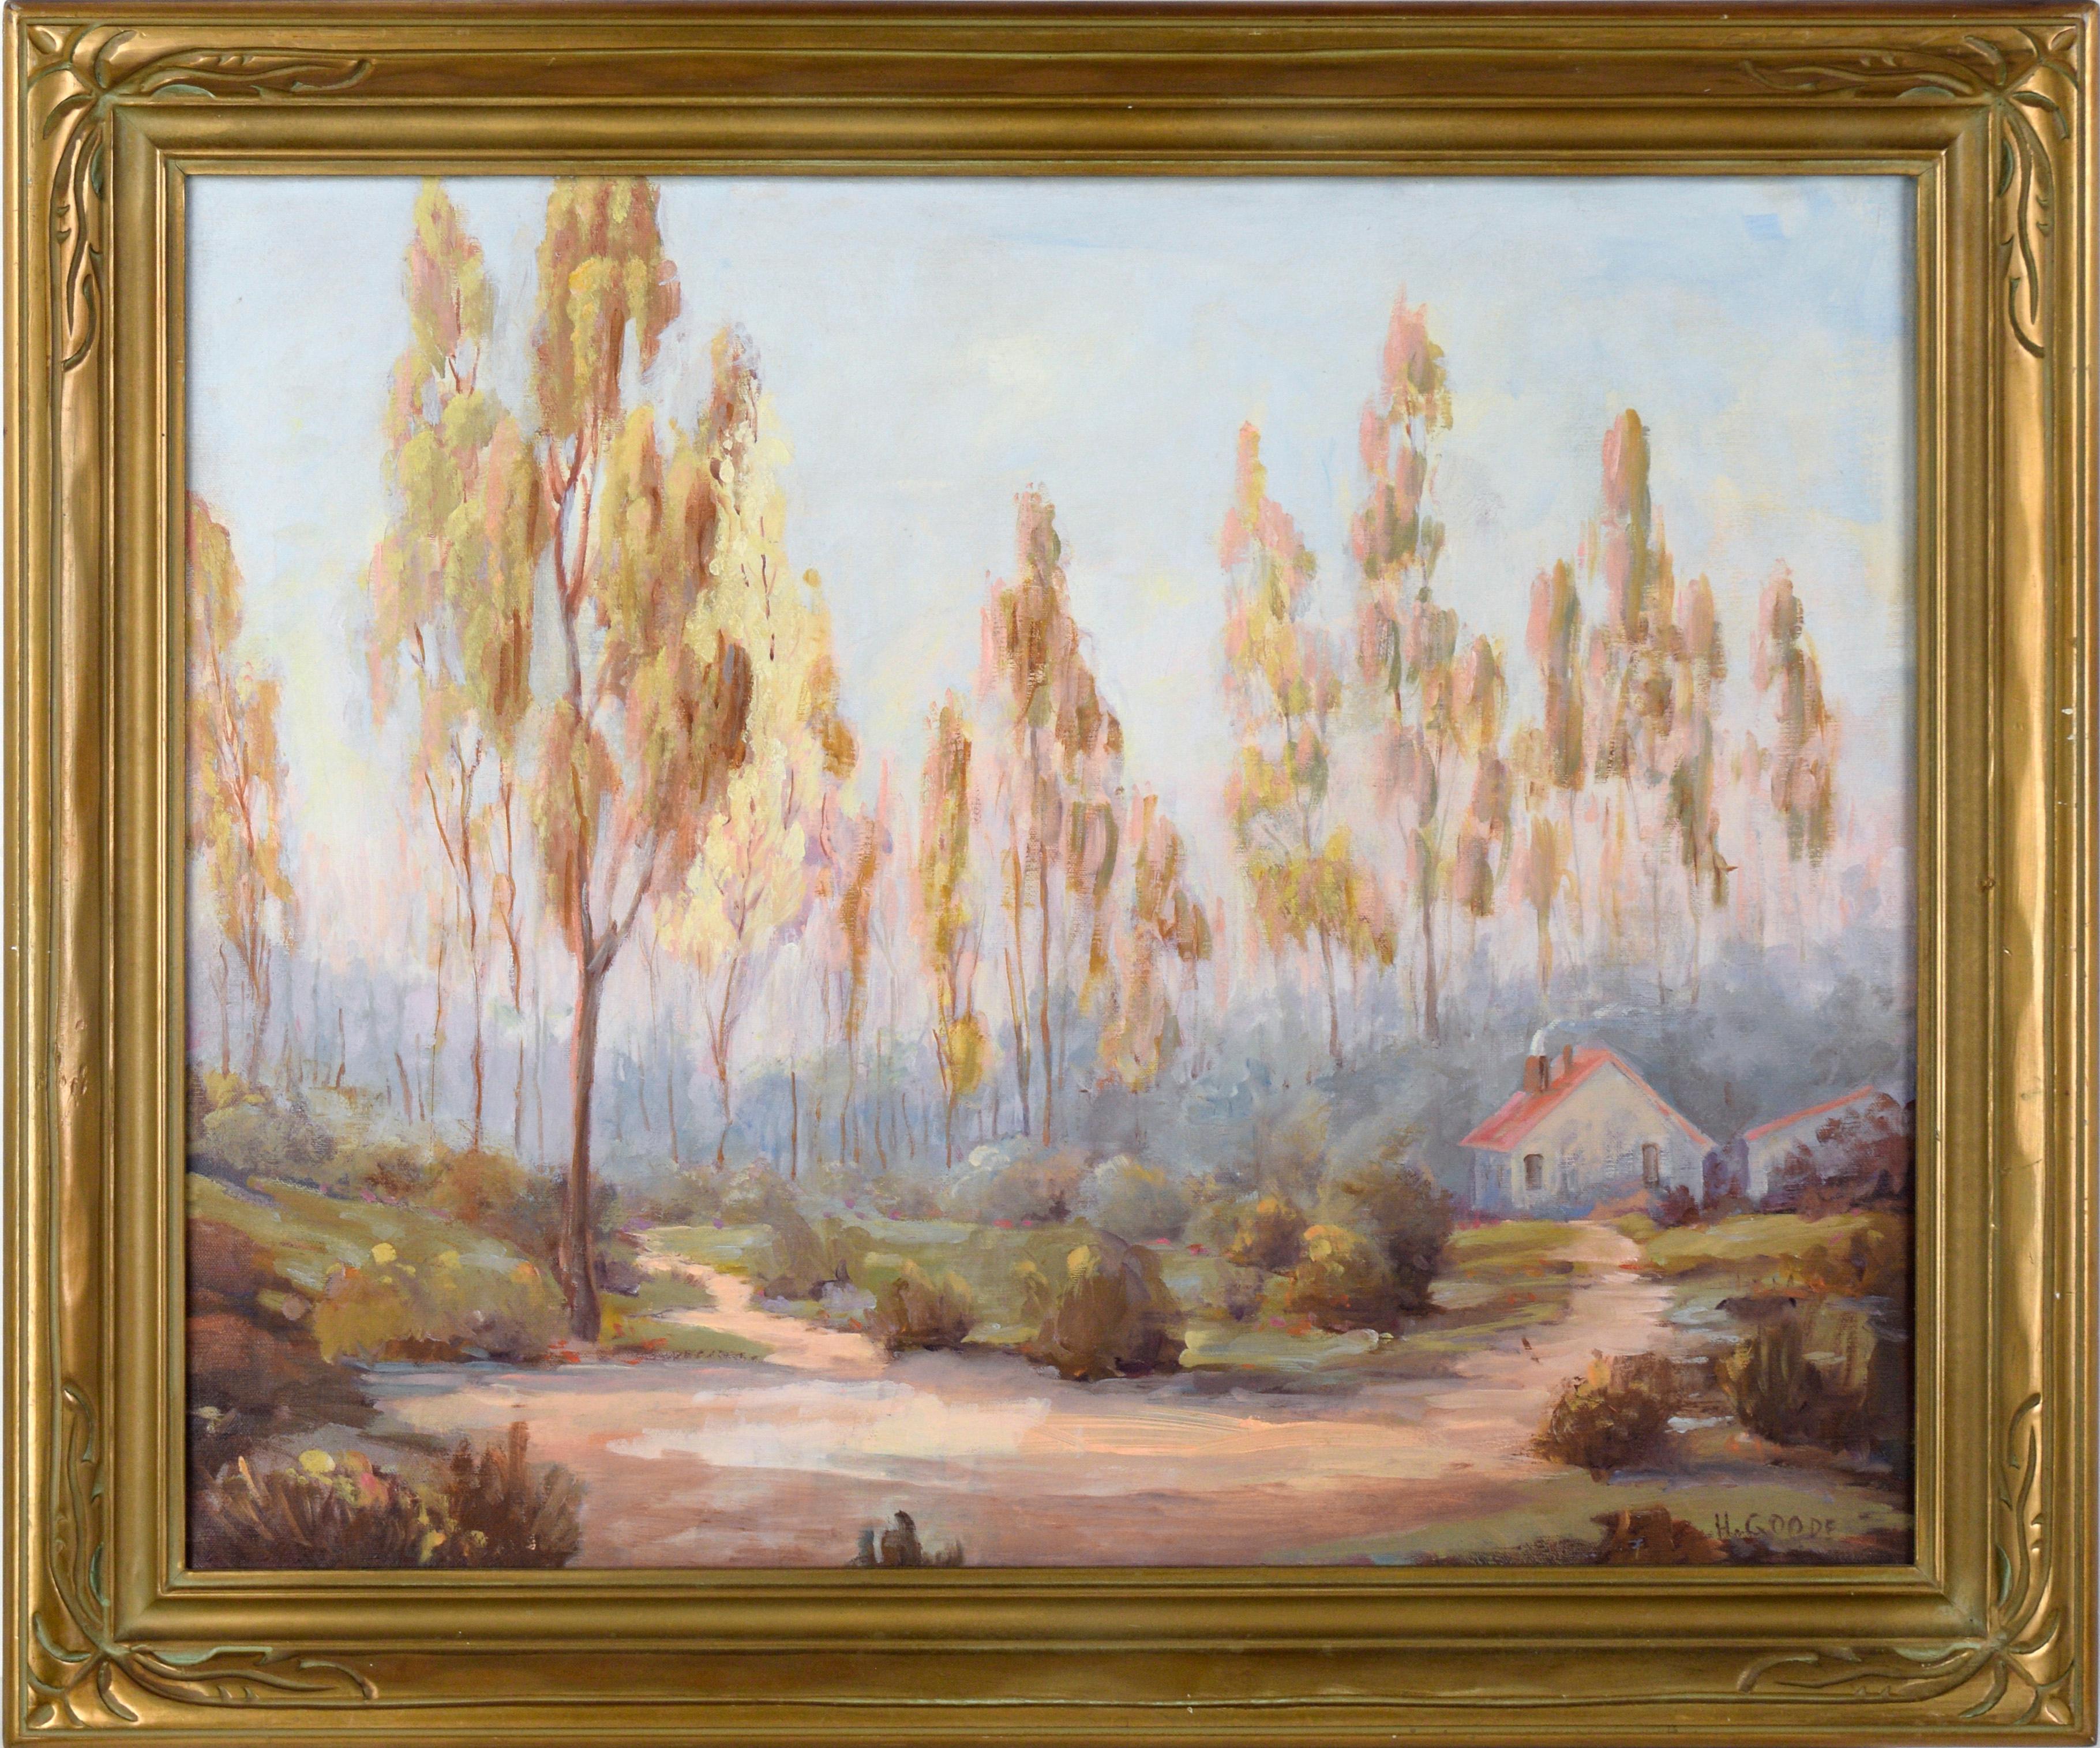 Henry B Goode Landscape Painting - Country House in Eucalyptus Grove - California Landscape in Oil on Canvas